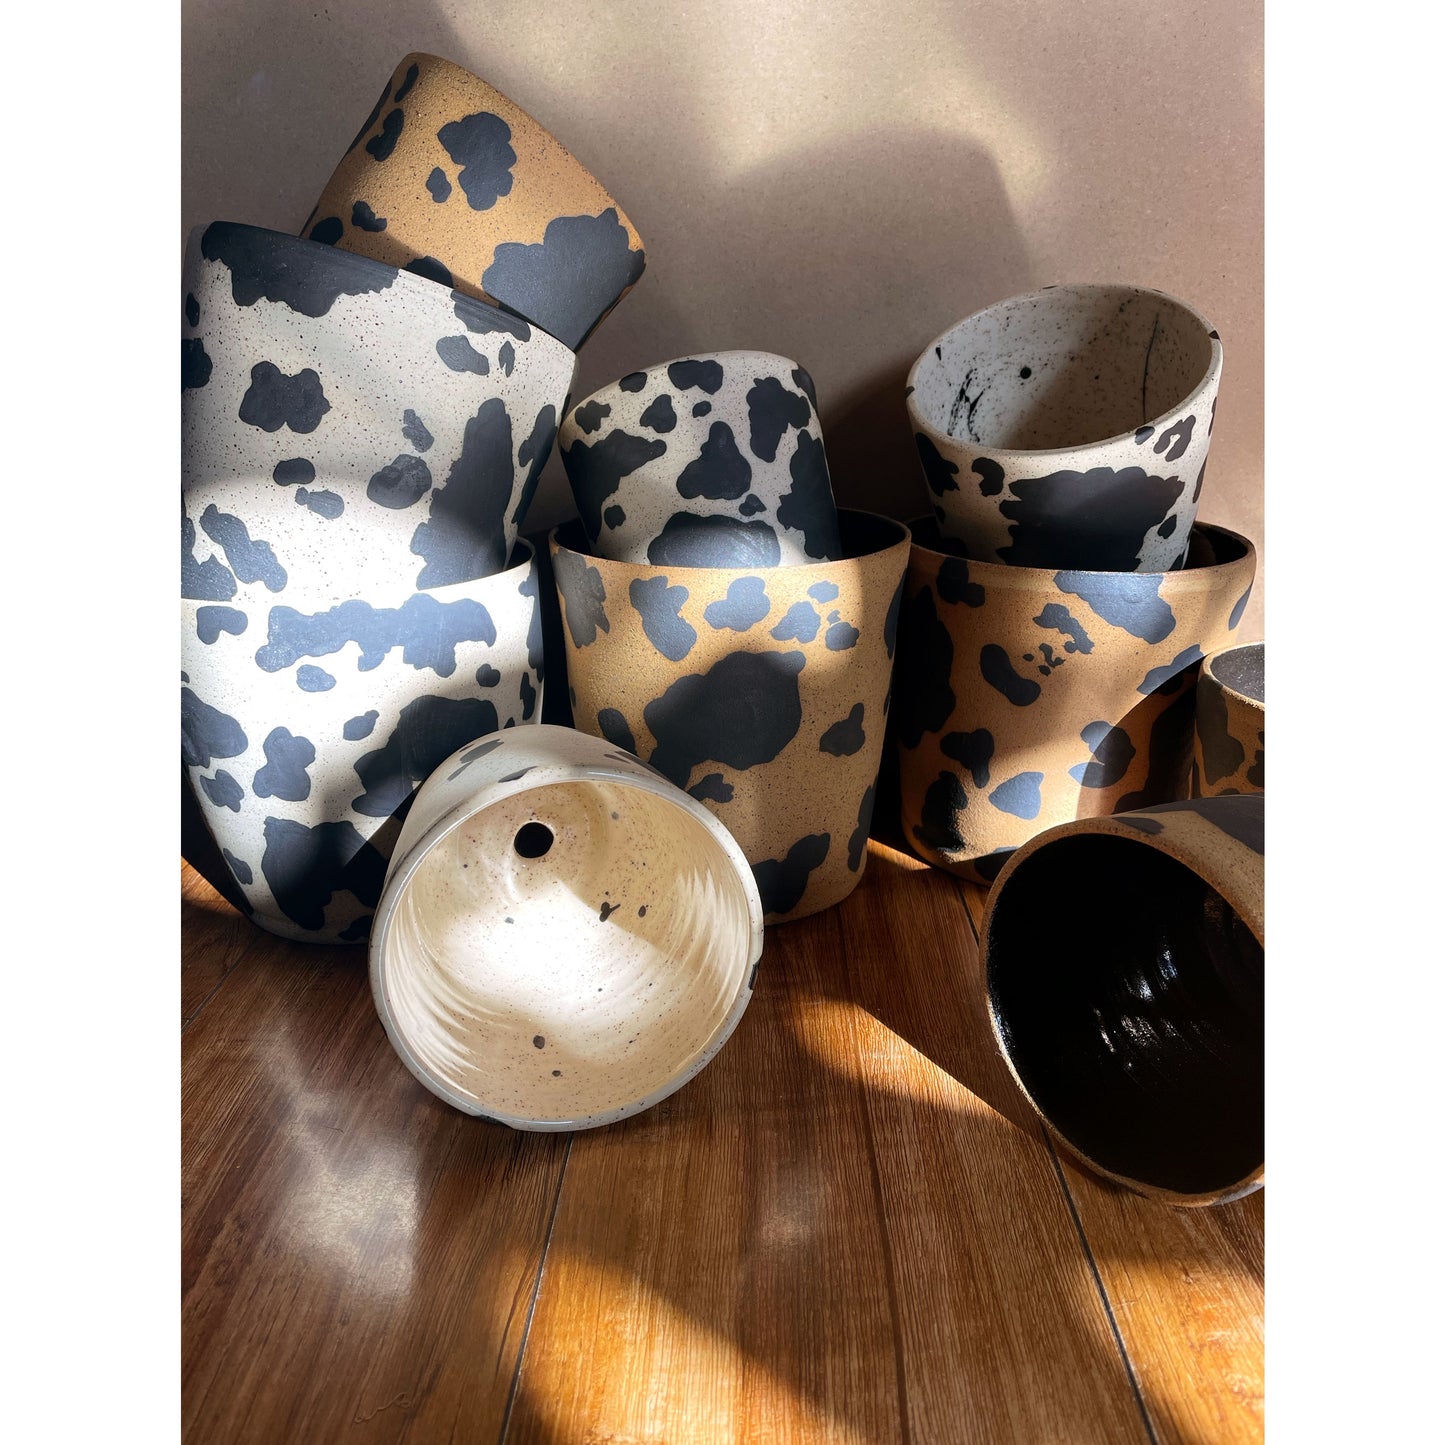 Handmade ceramic planter with a fun, hand painted cow print! Made with love in Oceanside, California by Hola Tonto Ceramics.